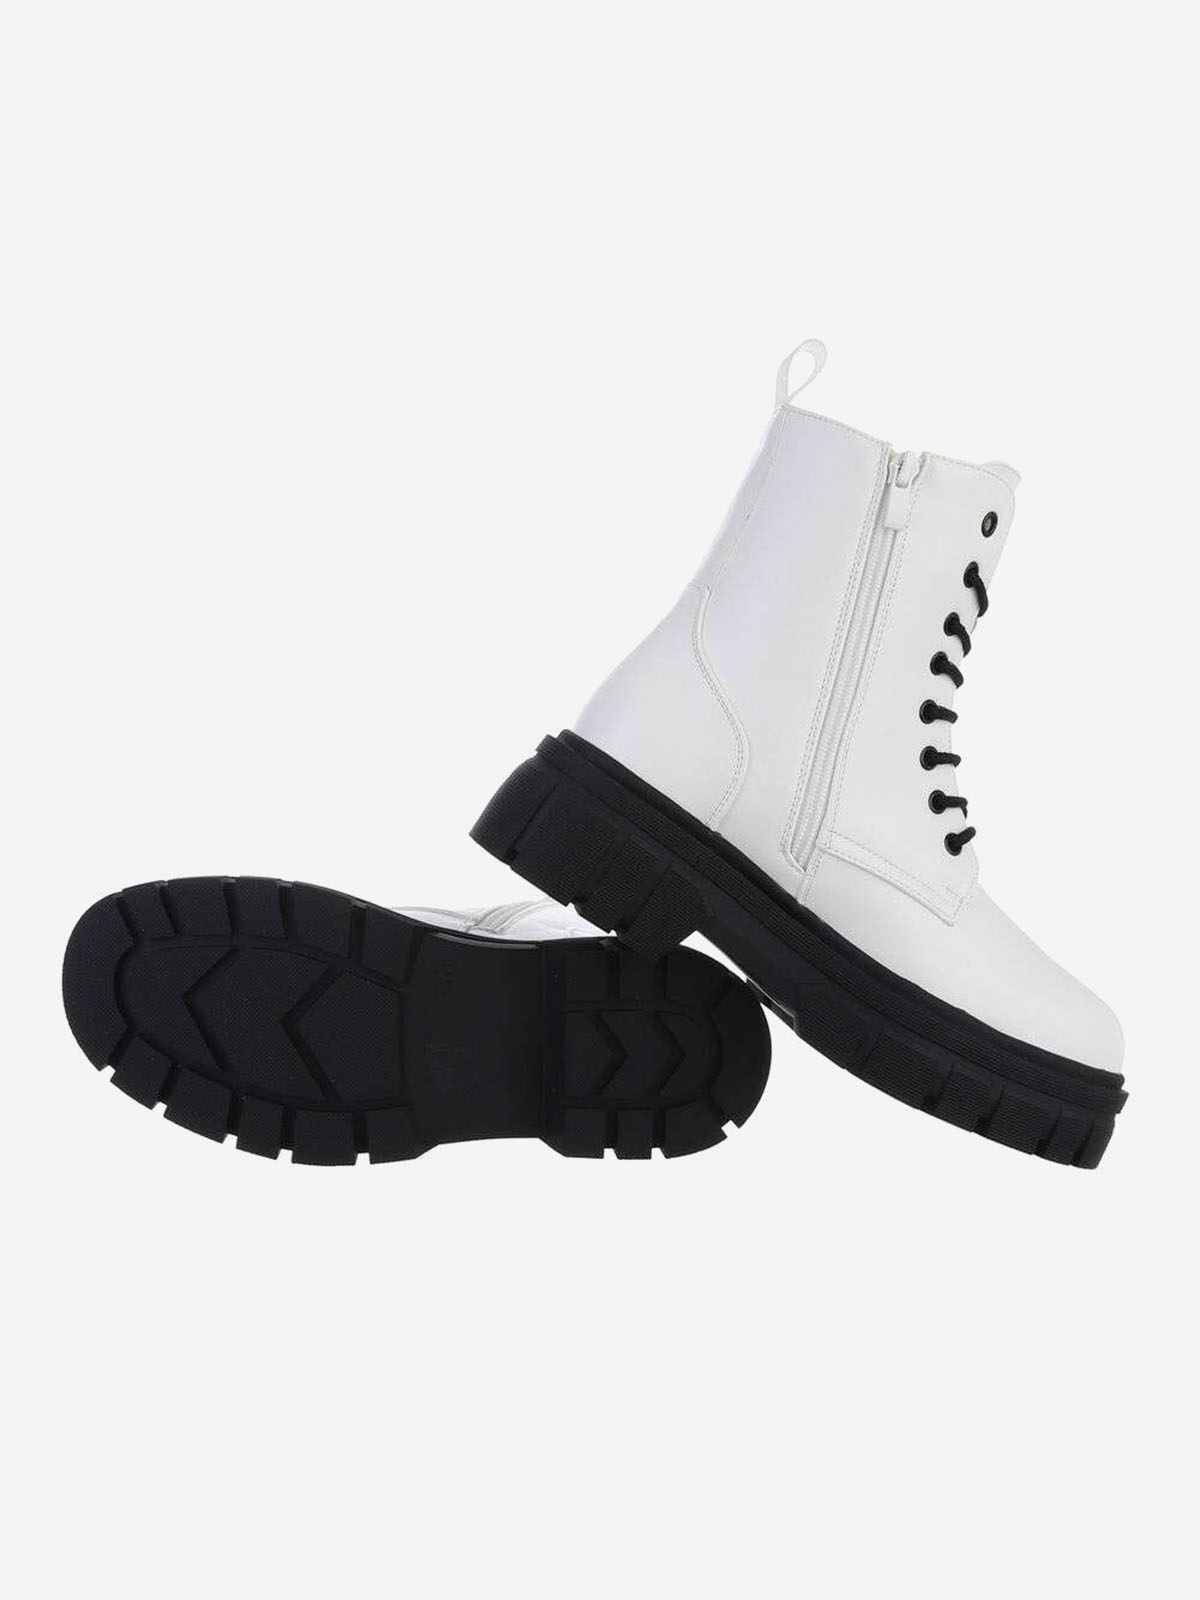 Lace-up women's ankle boots with platform in white